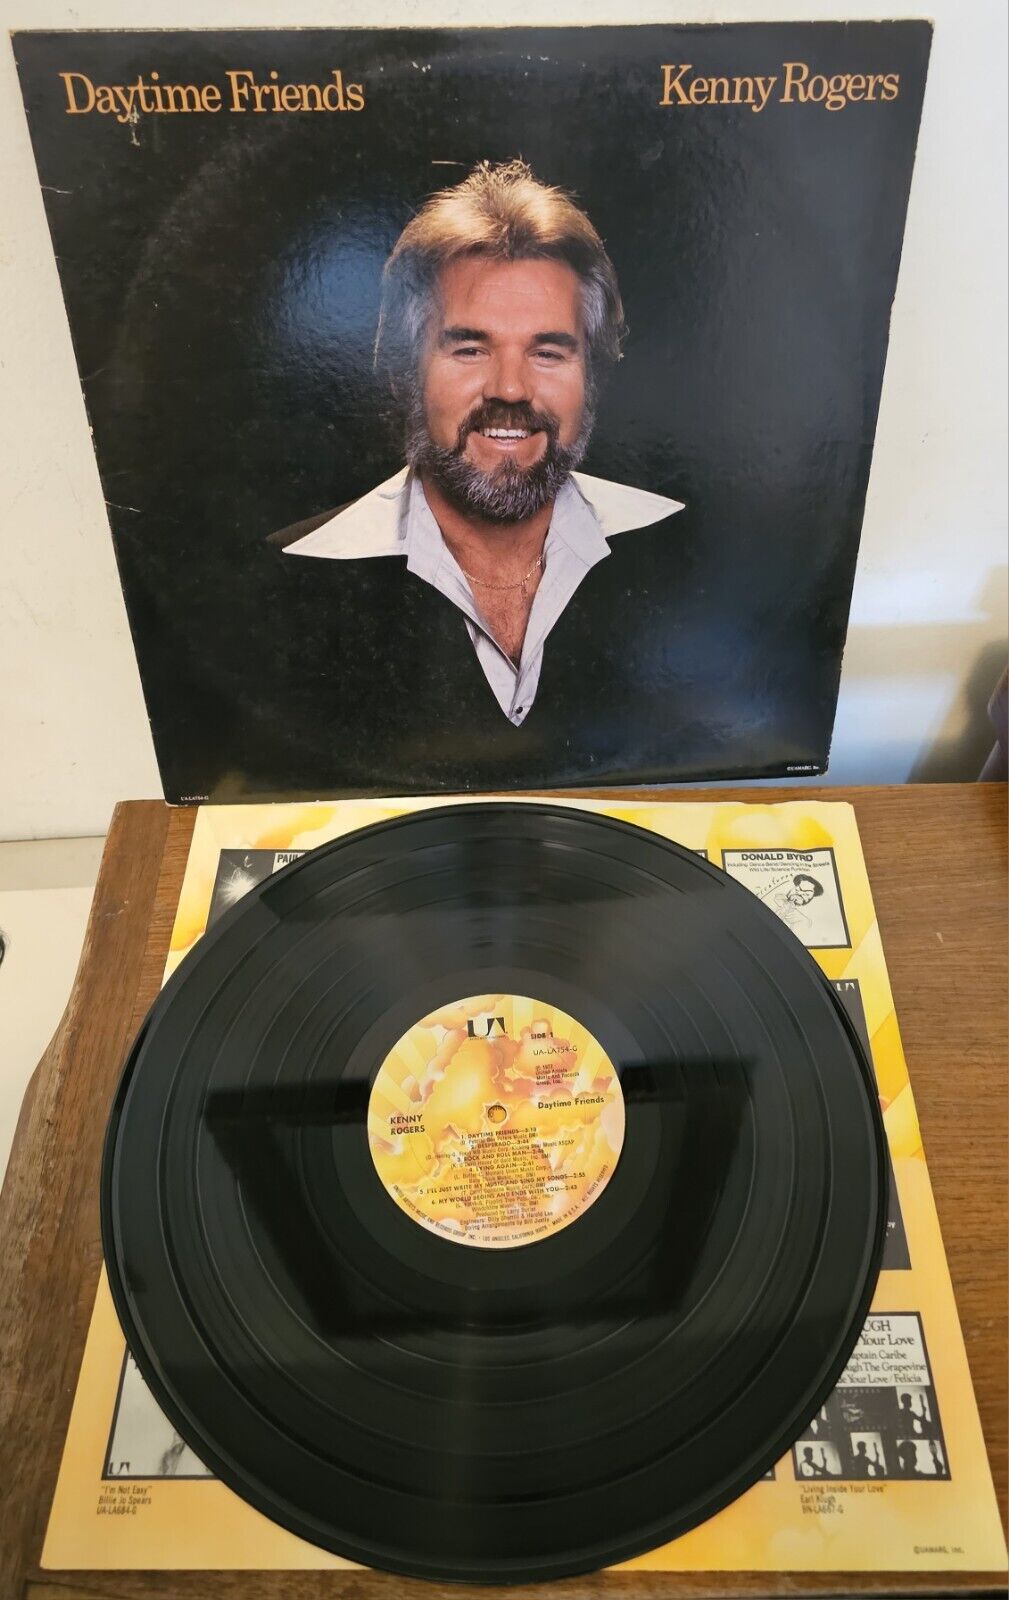 KENNY ROGERS DAYTIME FRIENDS UALA754 United Artist Records 1977 Vinyl Record LP